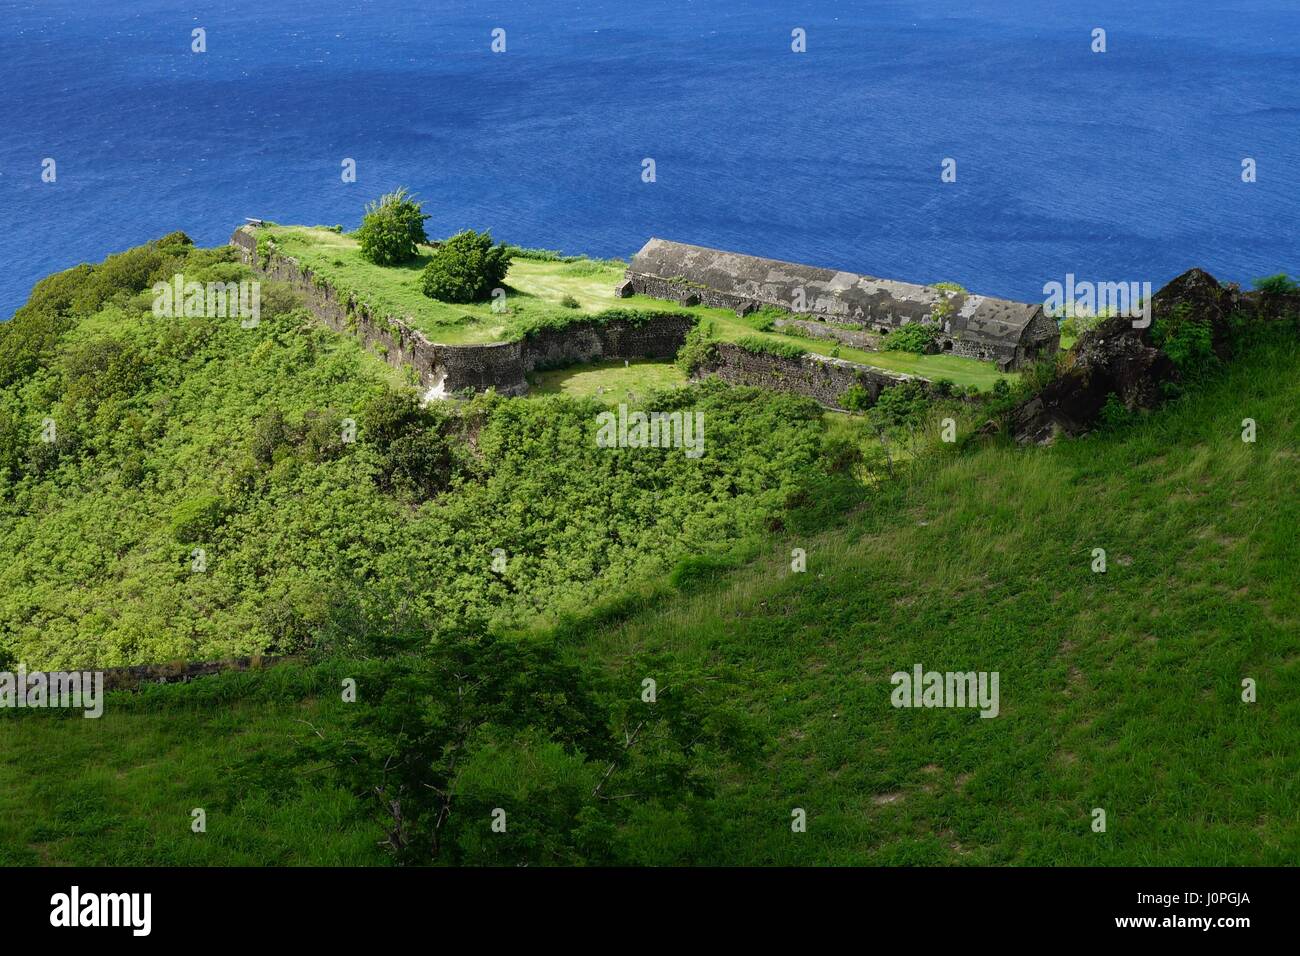 Brimstone Hill Fortress National Park, Saint Kitts and Nevis. Stock Photo